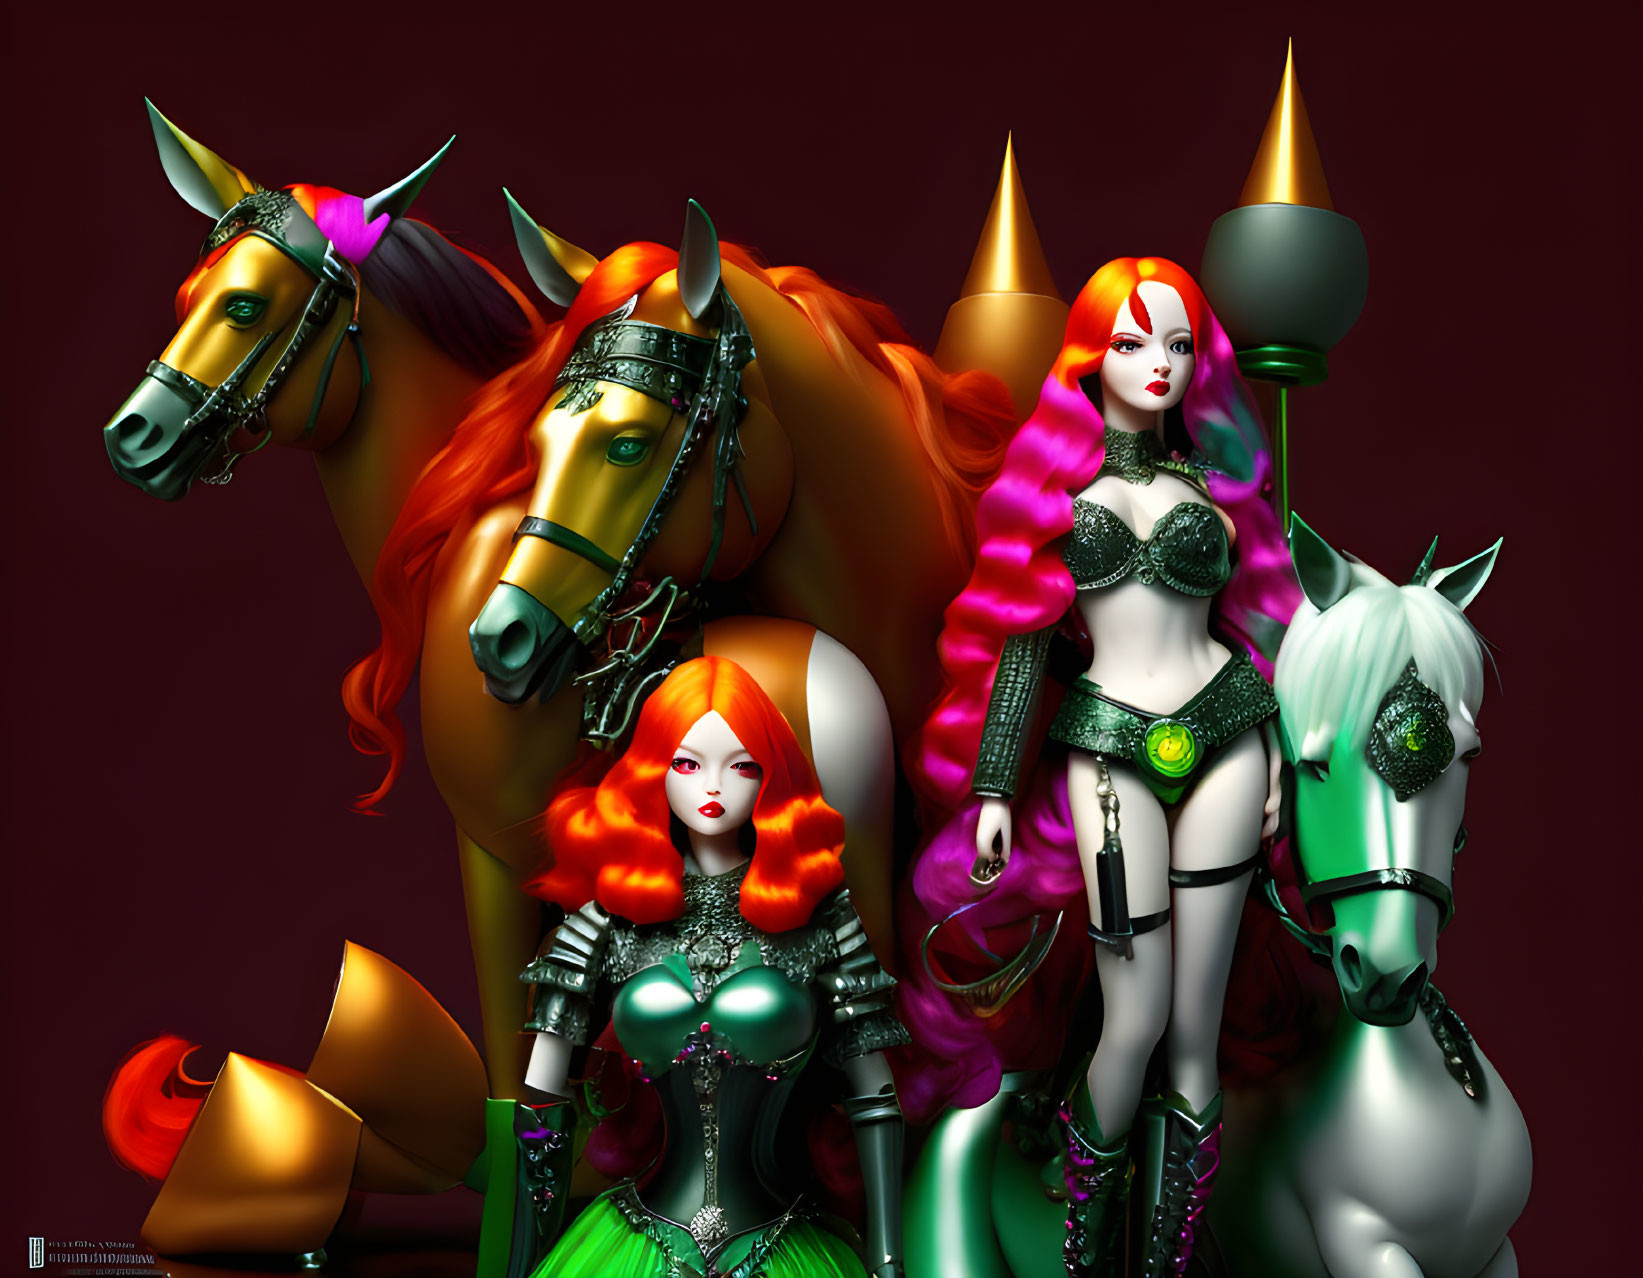 Stylized female warriors with colorful hair and fantasy armor alongside horses on burgundy backdrop